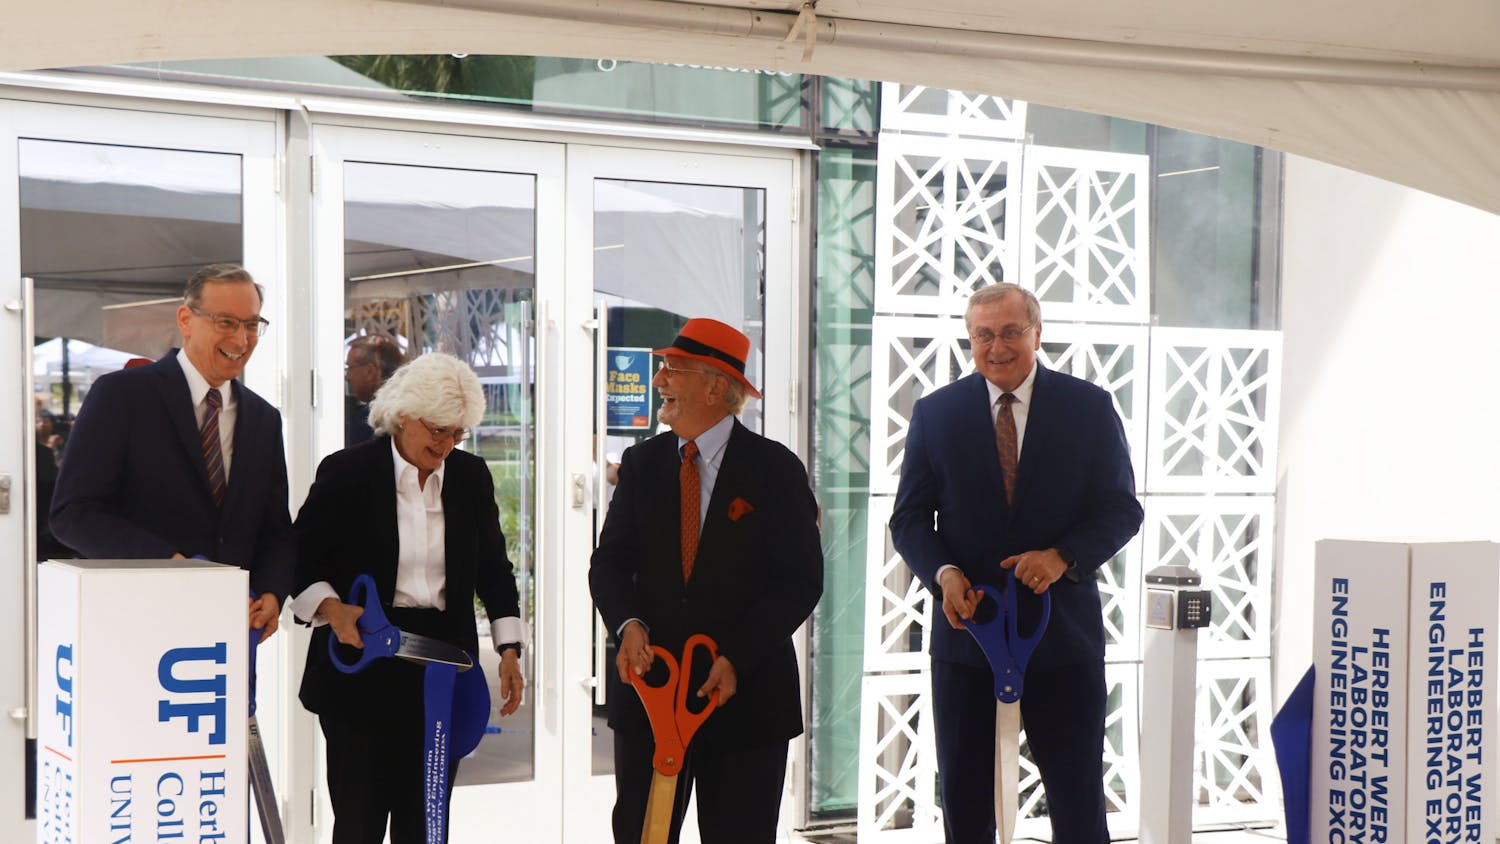 UF Provost Joseph Glover, Dean of the College of Engineering Cammy Abernathy, UF College of Engineering namesake Herbert Wertheim and UF President Kent Fuchs (left to right) are seen moments after cutting the ribbon at the Herbert Wertheim Laboratory for Engineering Excellence, Wertheim&#x27;s namesake, on Thursday, Oct. 7, 2021.